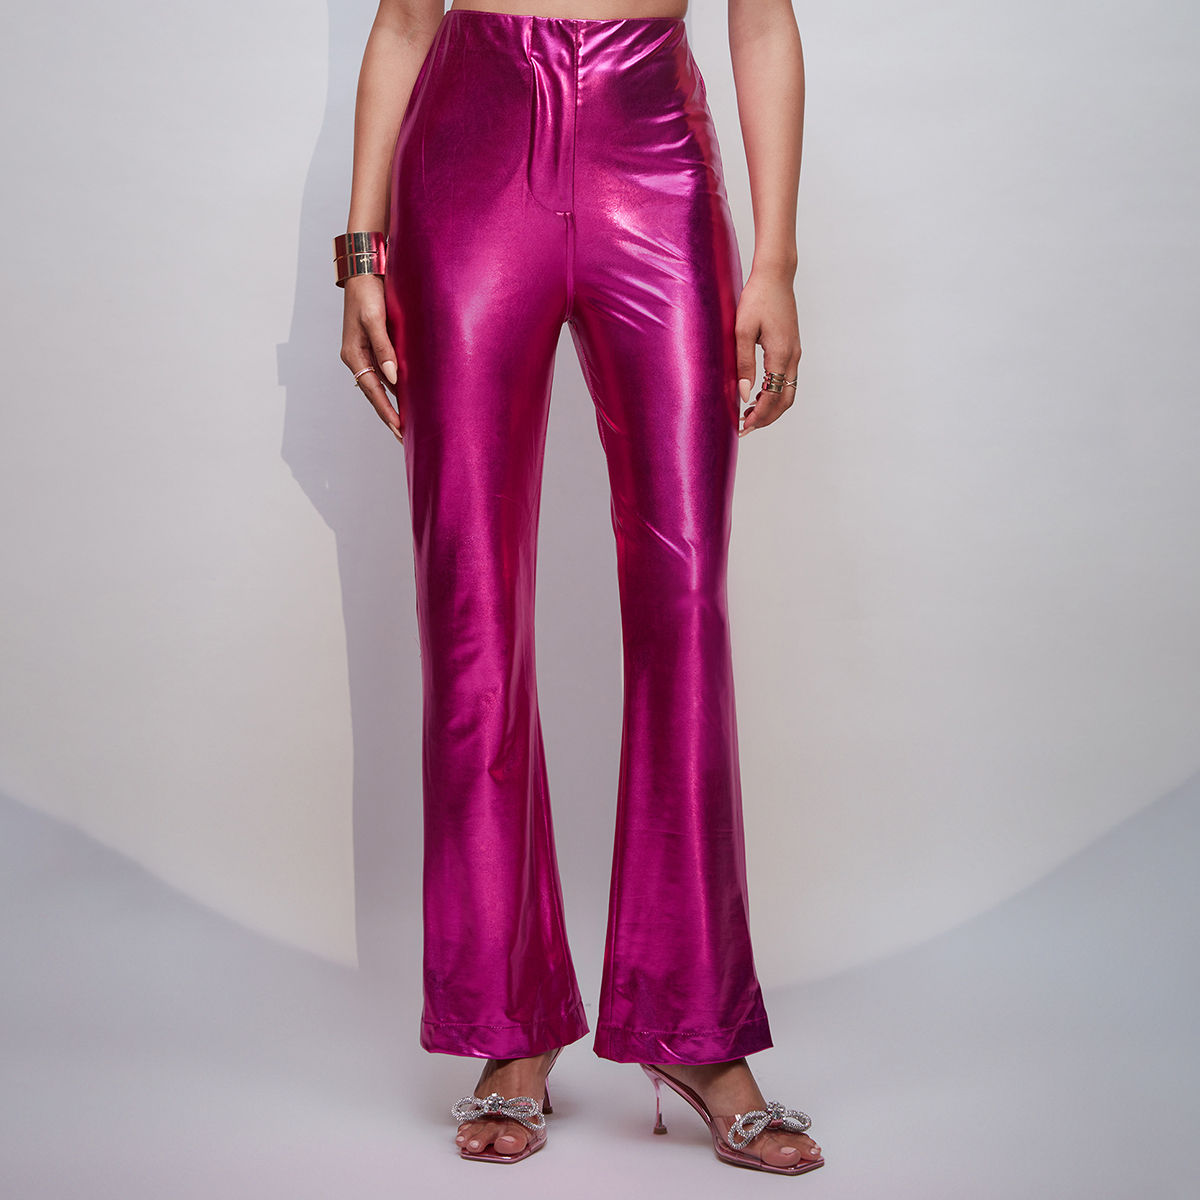 These Metallic Palazzo Pants Are Killing Me Right Now